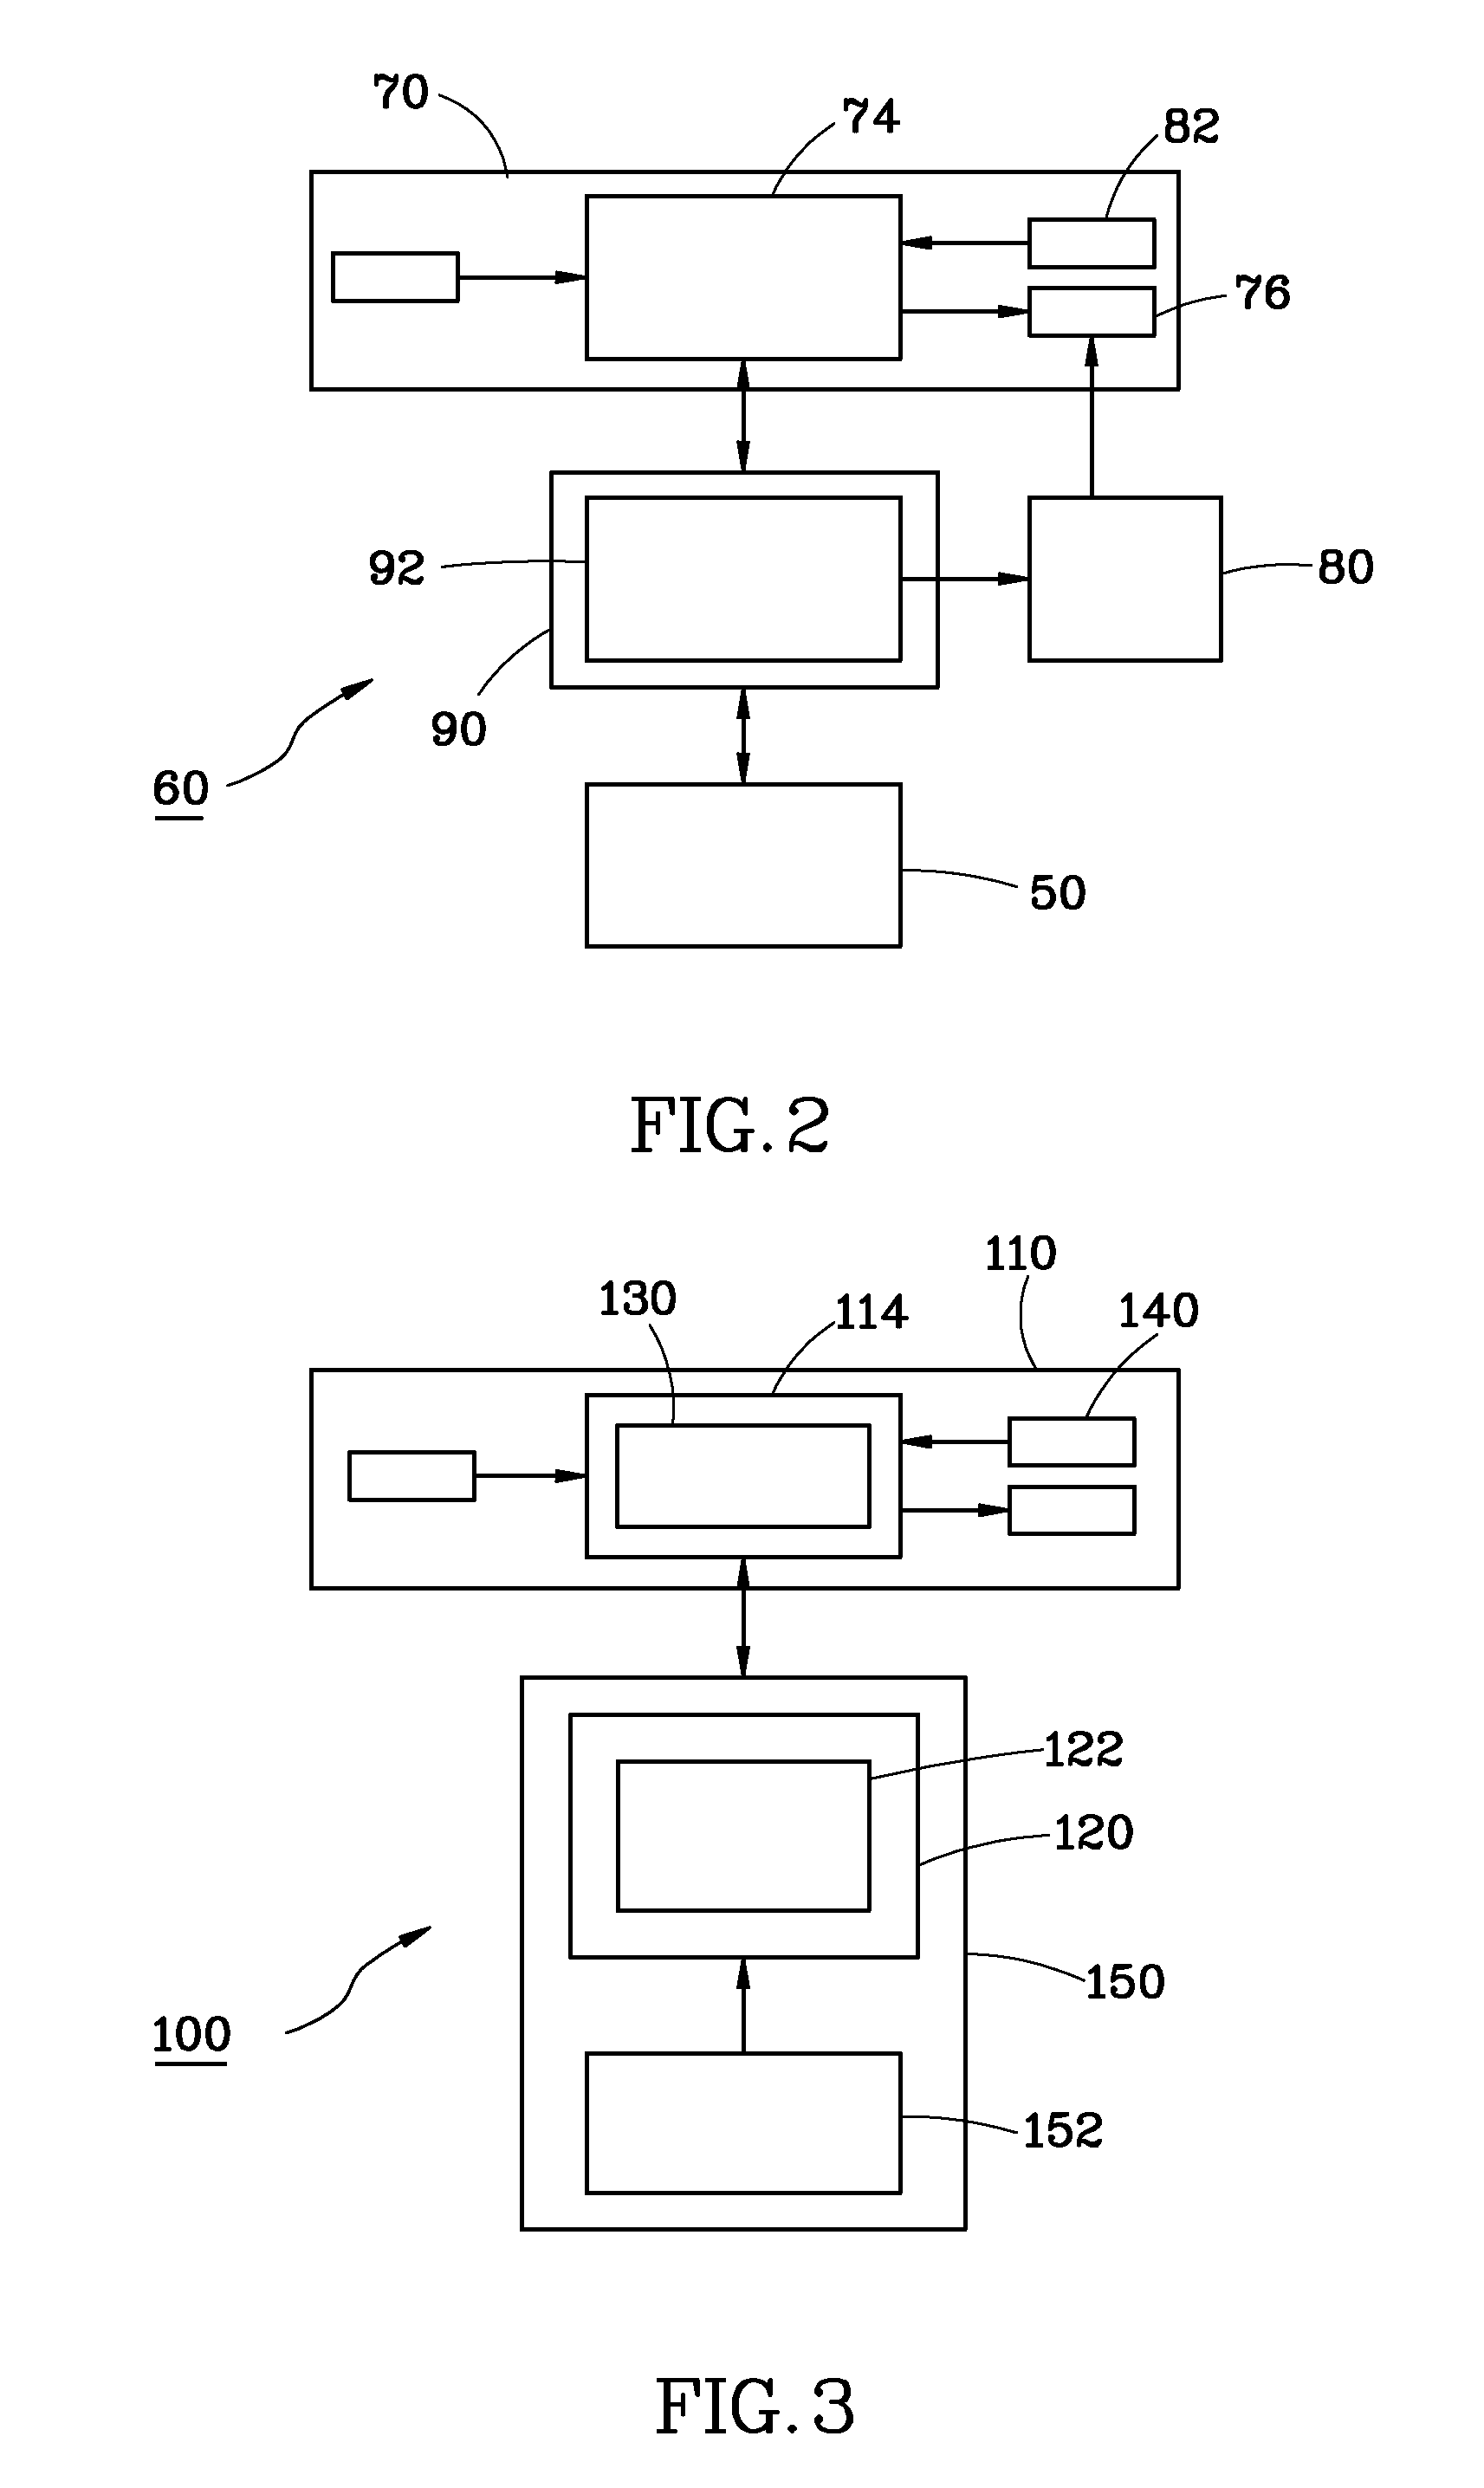 Assisting listening device having audiometry function